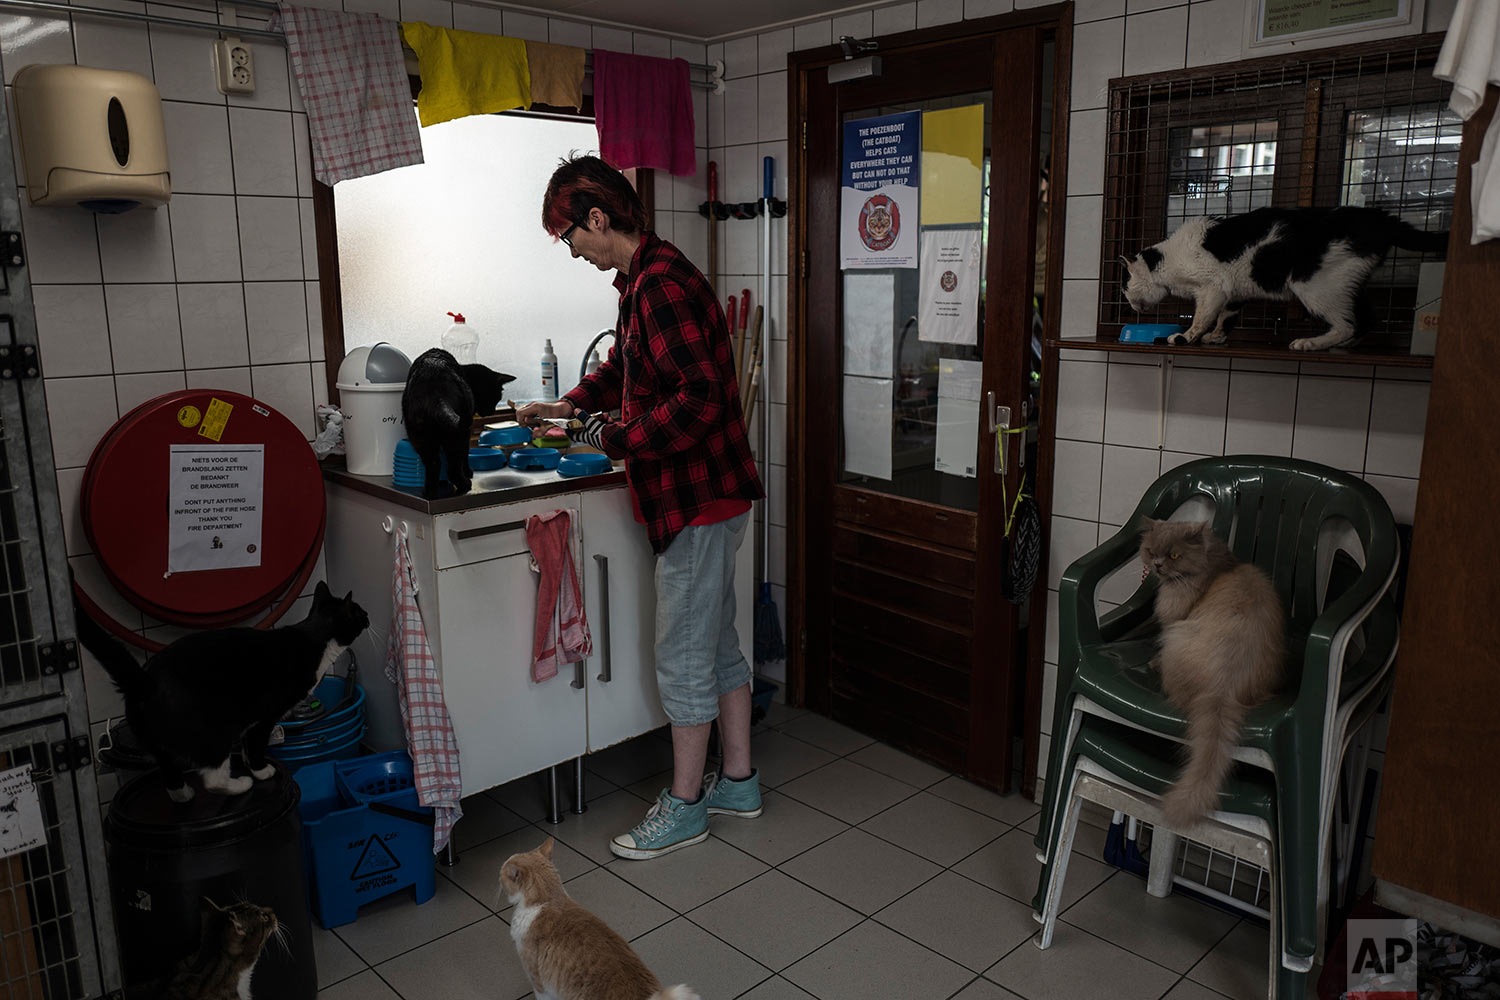  In this Wednesday, Aug. 2, 2017 photo, Judith Gobets, the shelter's manager, prepares food for the cats on the Catboat shelter in Amsterdam, Netherlands. (AP Photo/Muhammed Muheisen) 